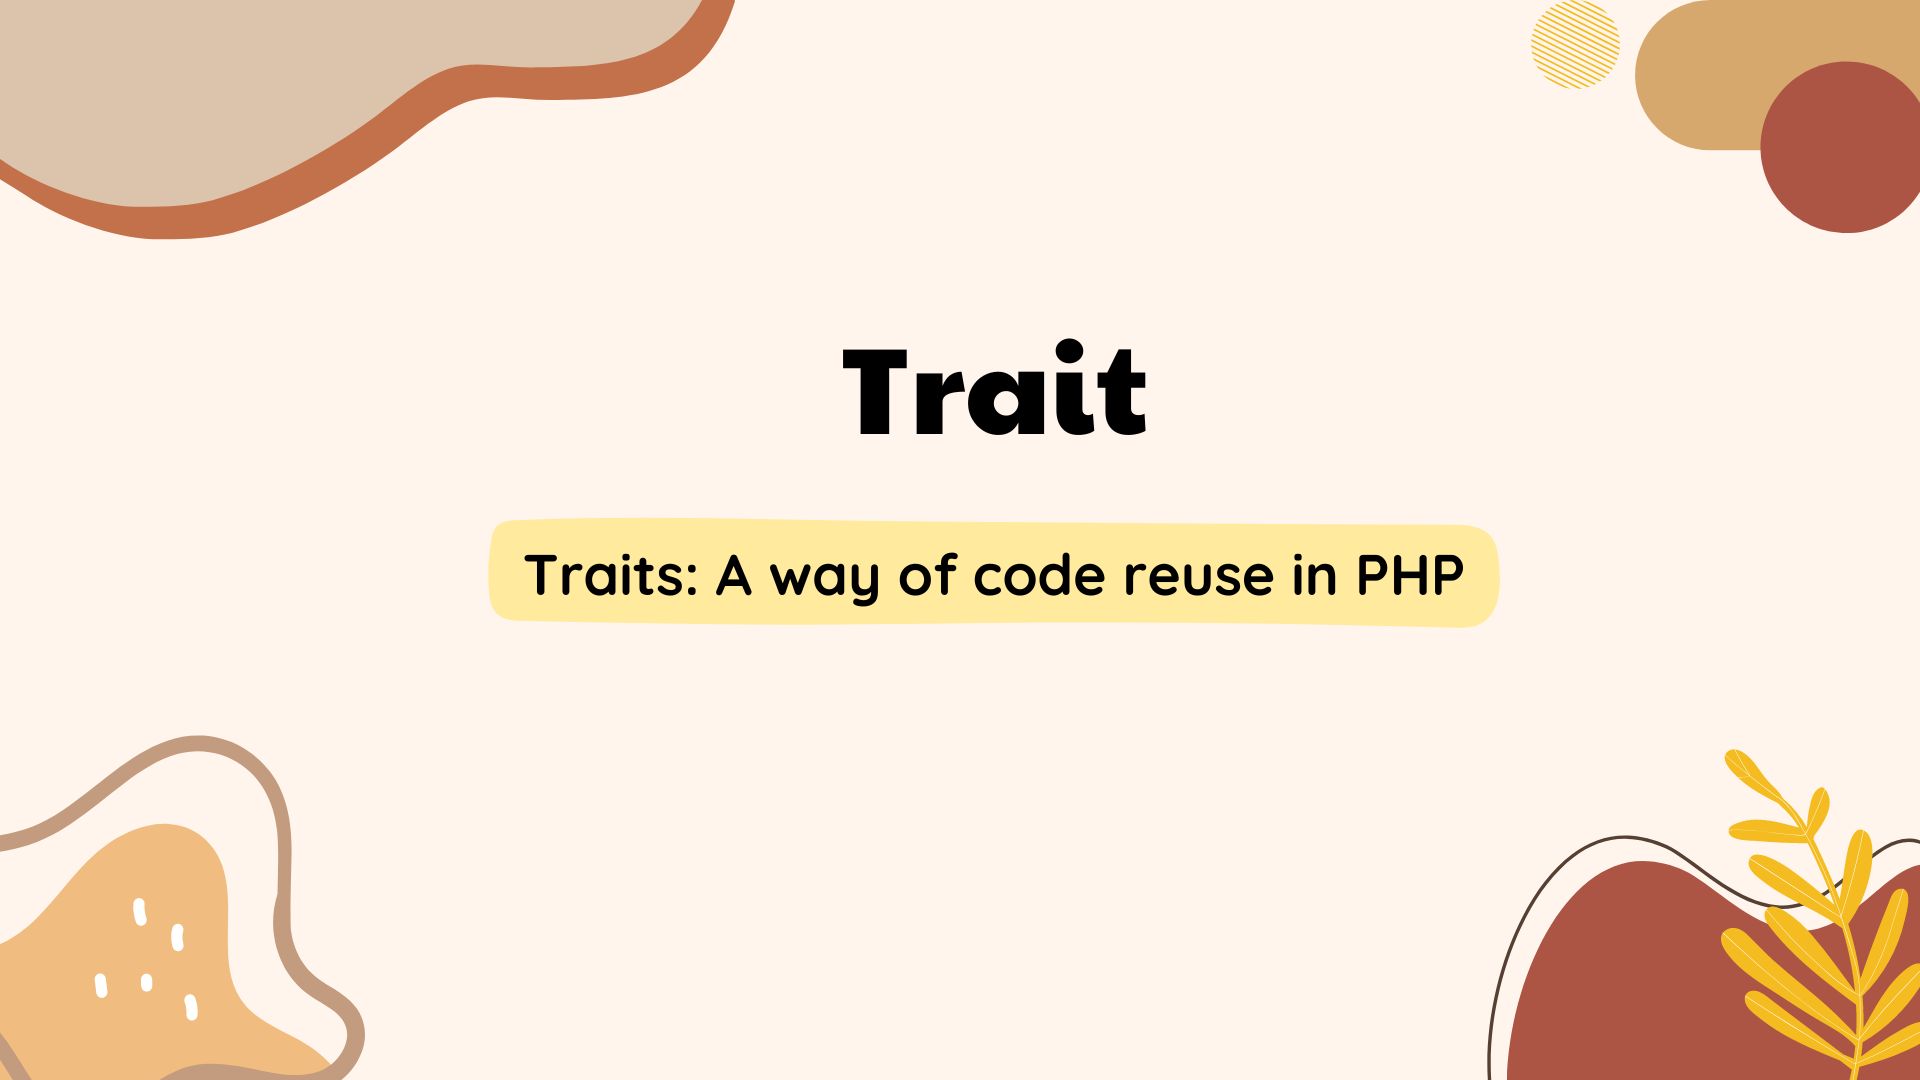 Traits: A way of code reuse in PHP